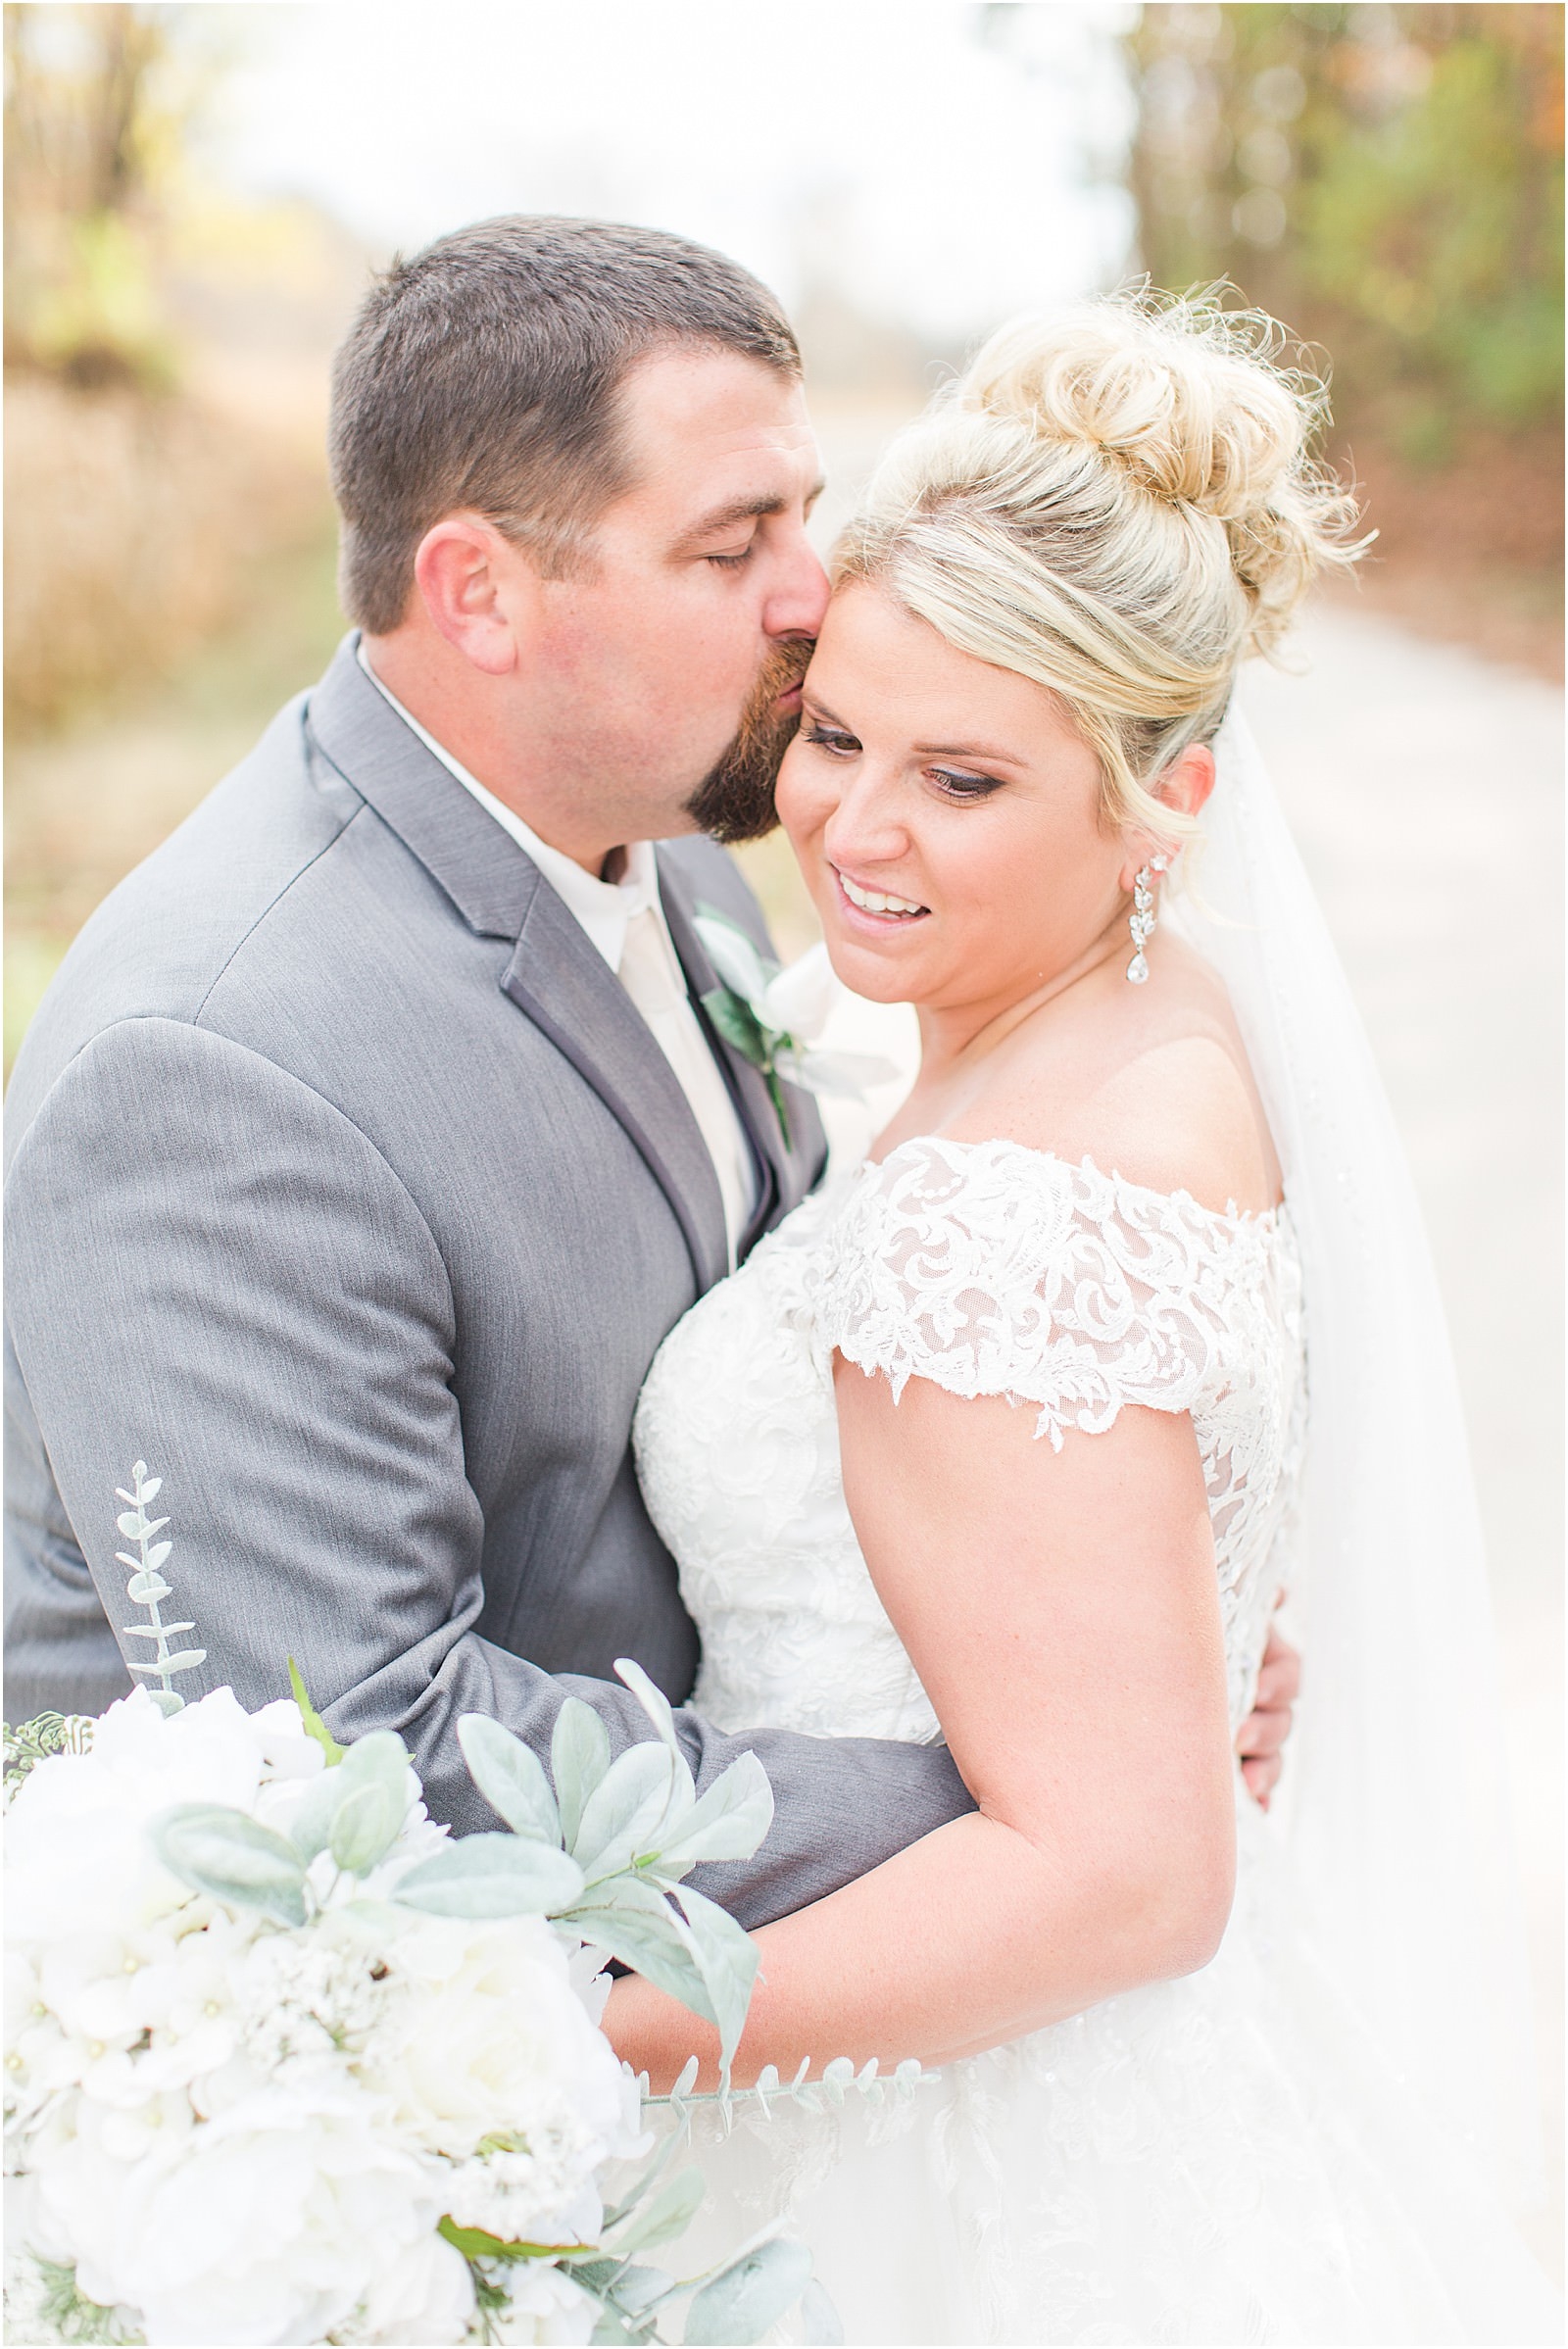 A Navy and Blush Wedding in Tell City Indiana | Brianna and Matt | Bret and Brandie Photography 0121.jpg